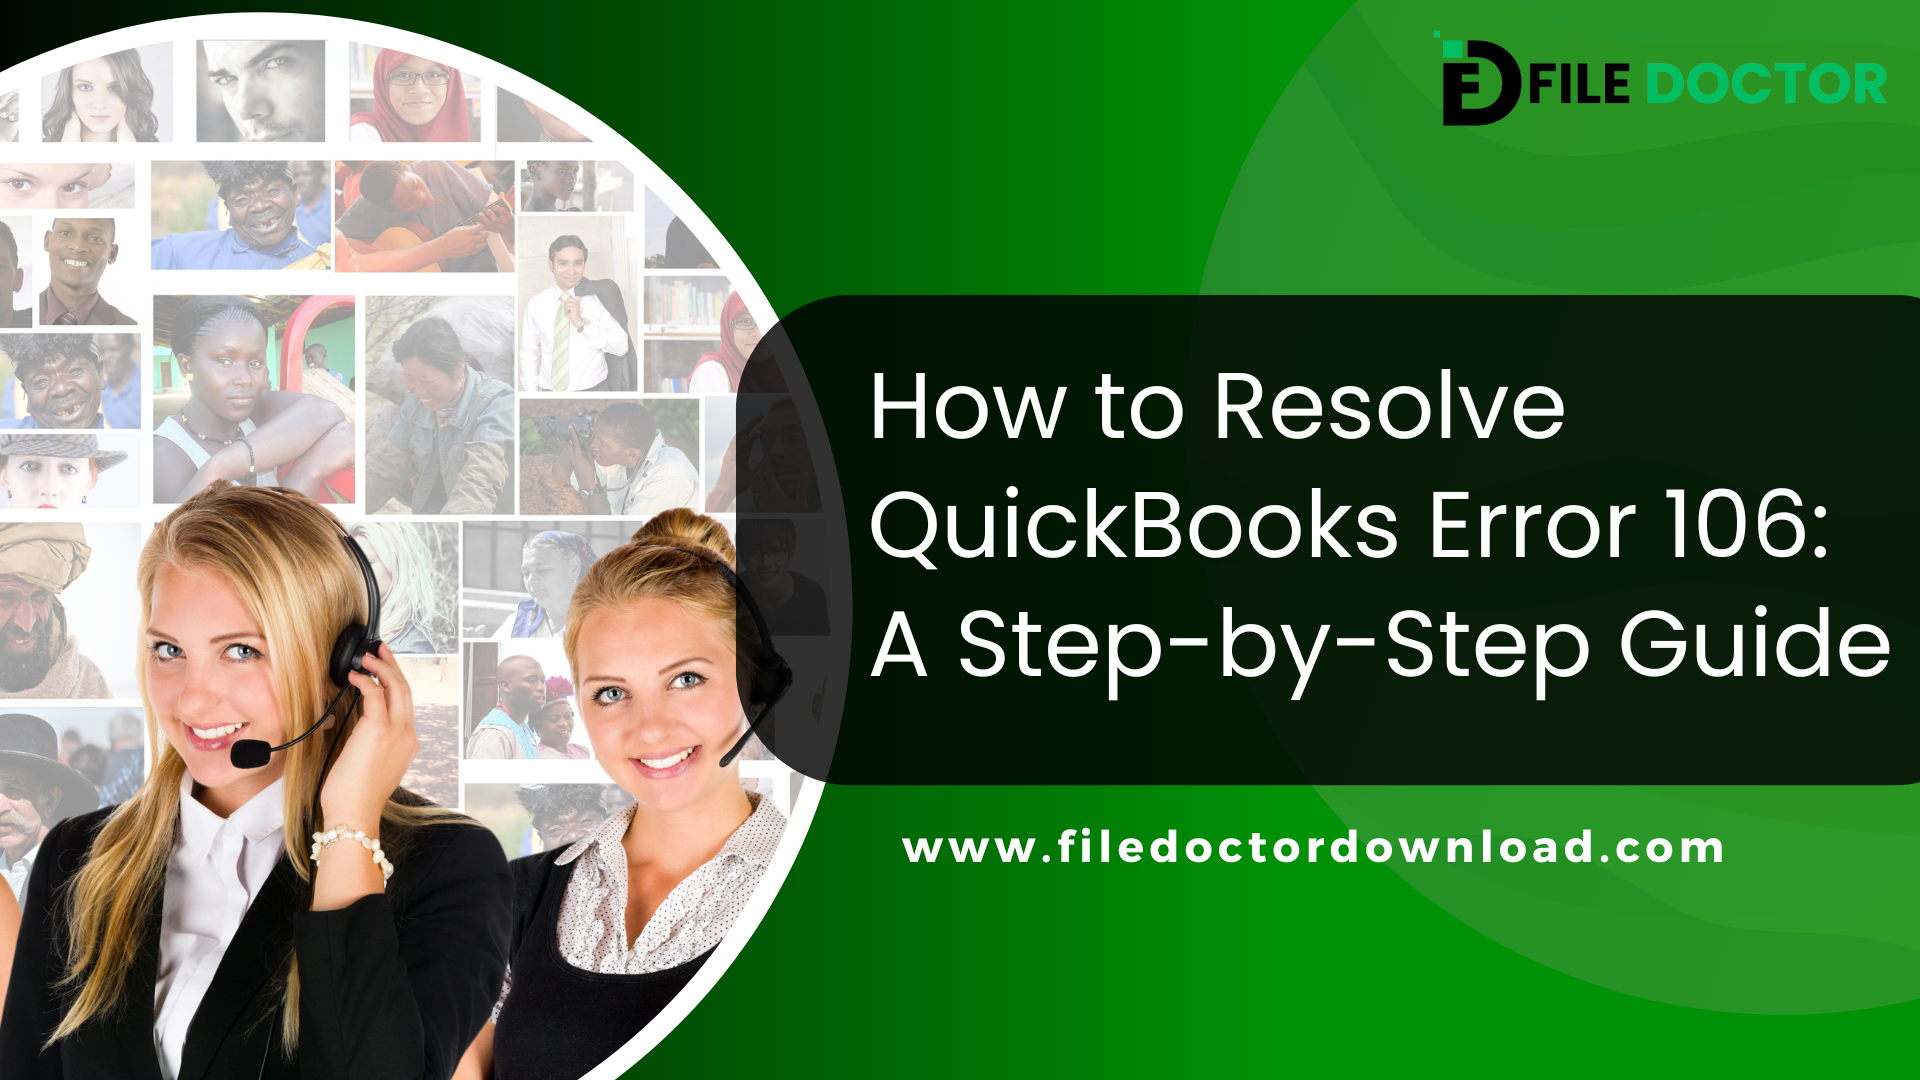 How to Resolve QuickBooks Error 106: A Step-by-Step Guide